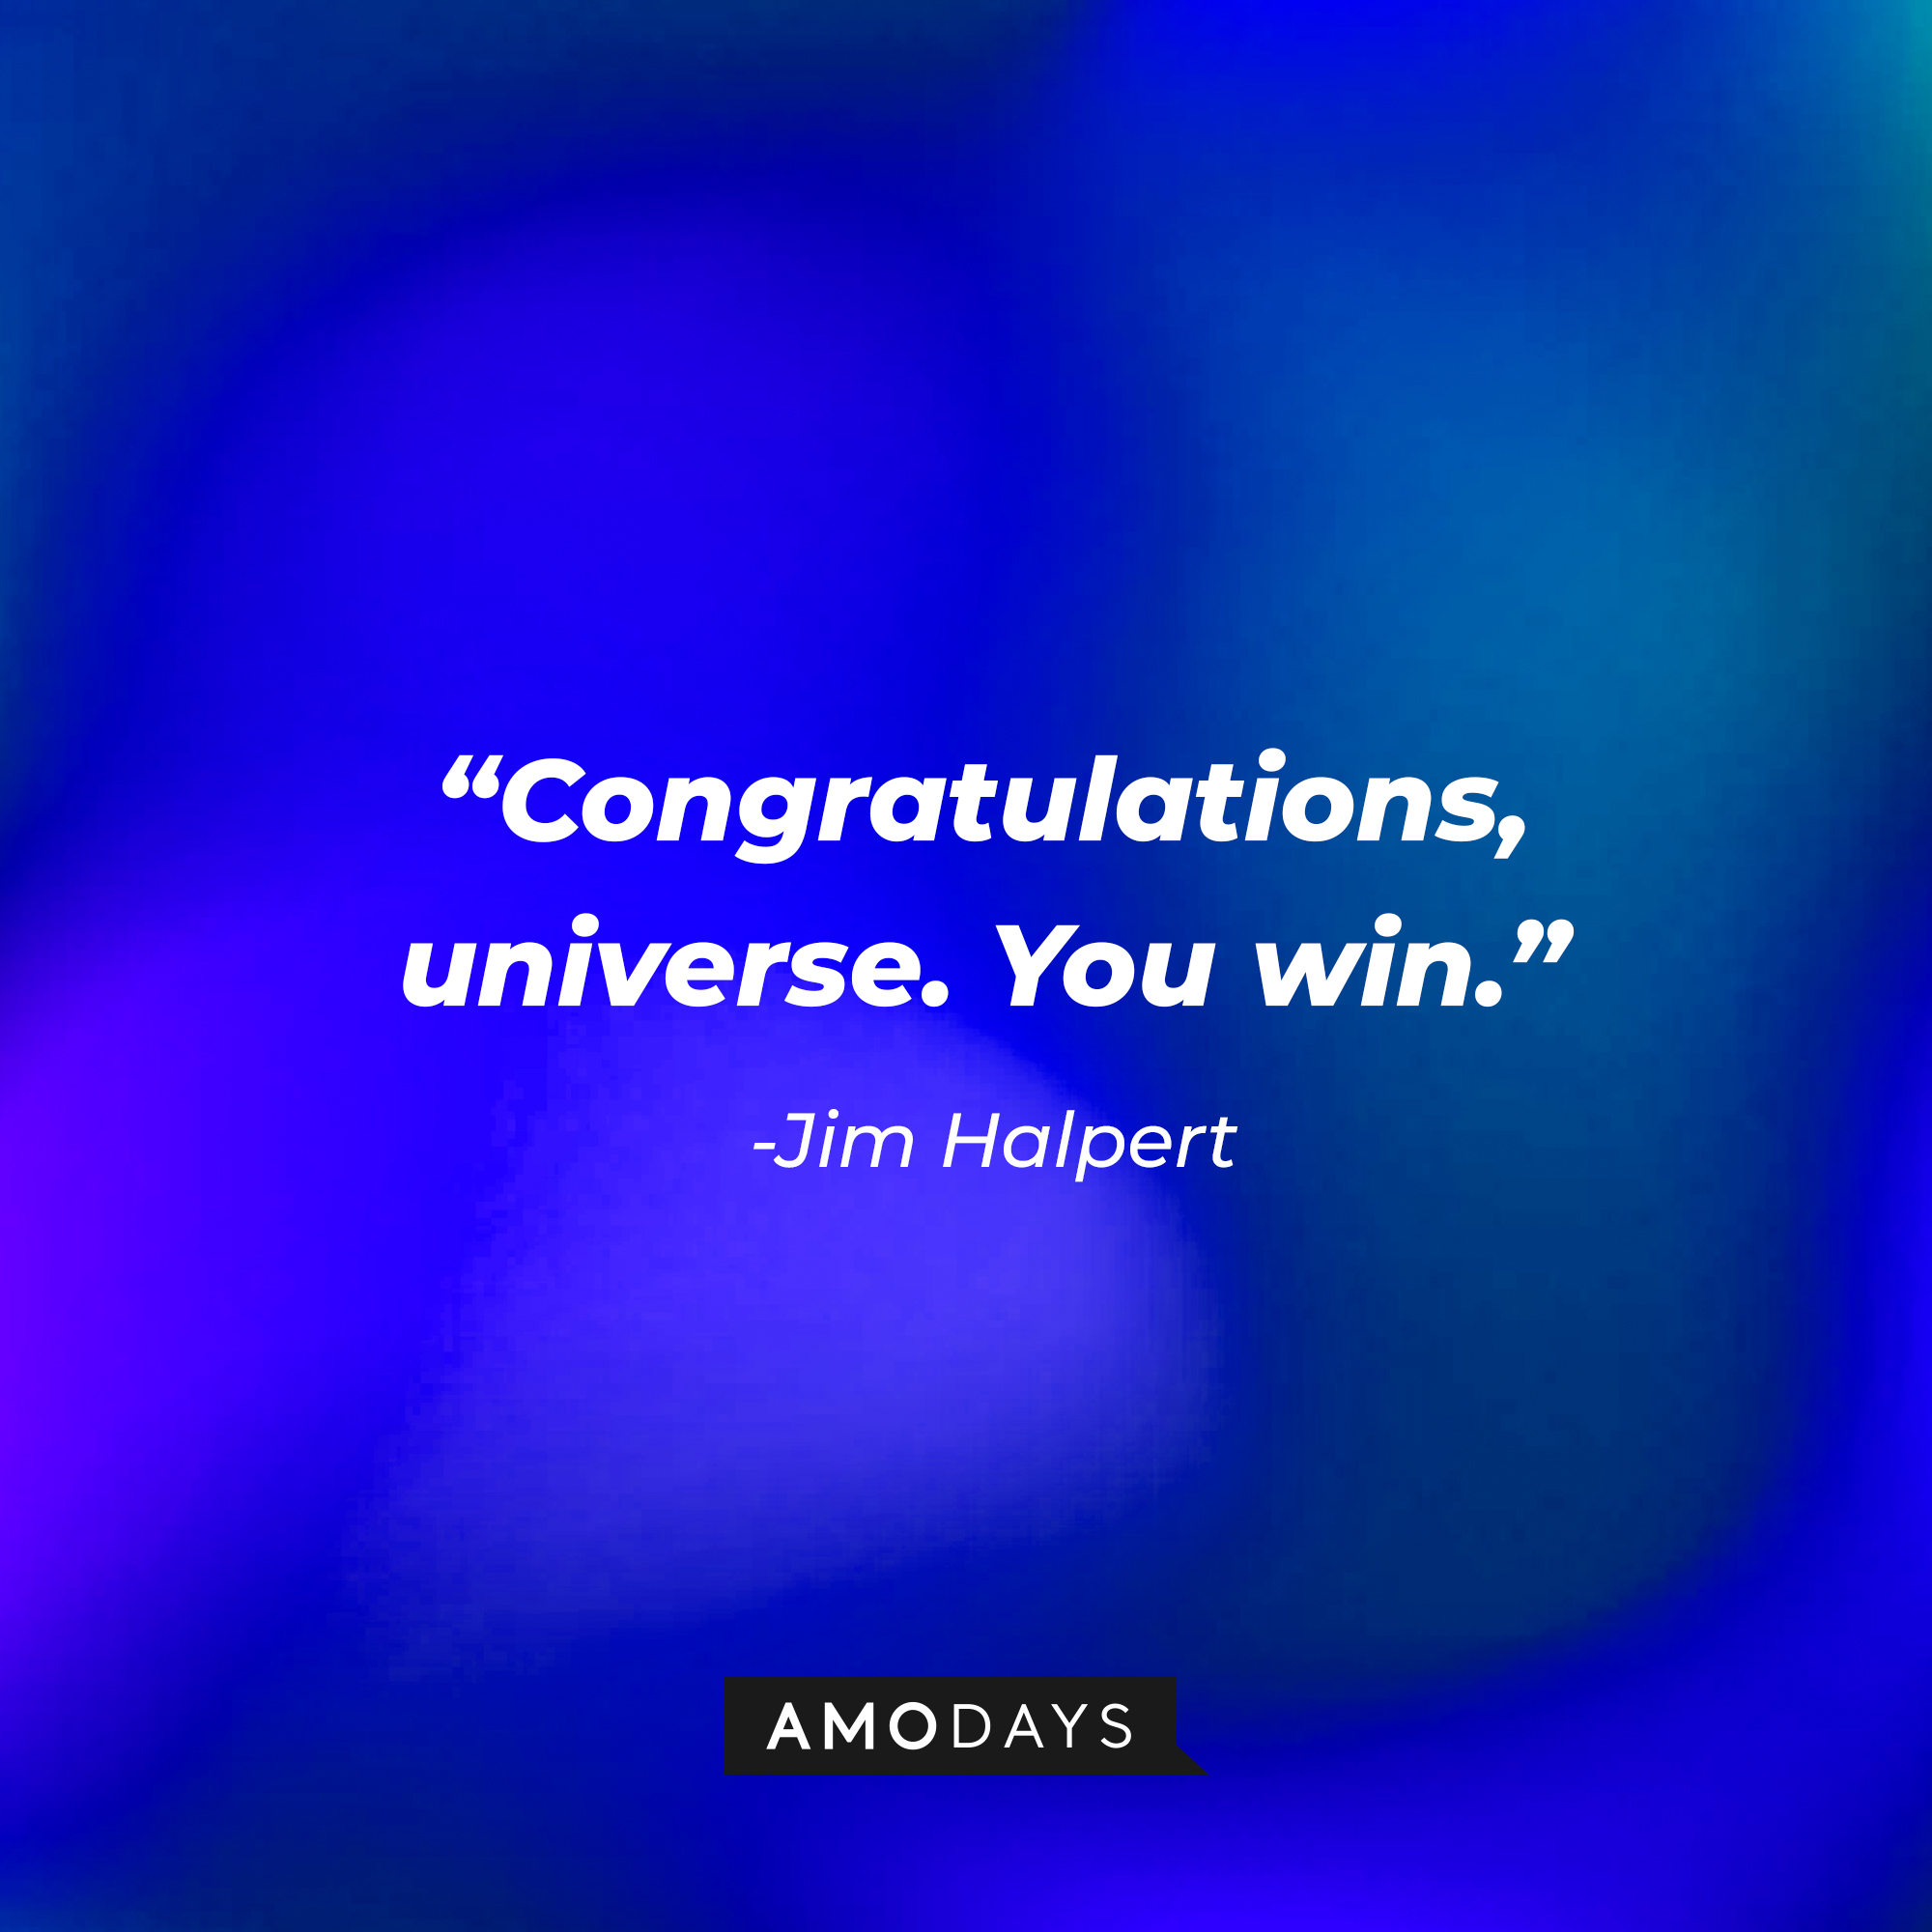 An image of Jim Halpert with his quote: “Congratulations, universe. You win.” | Source: AmoDays